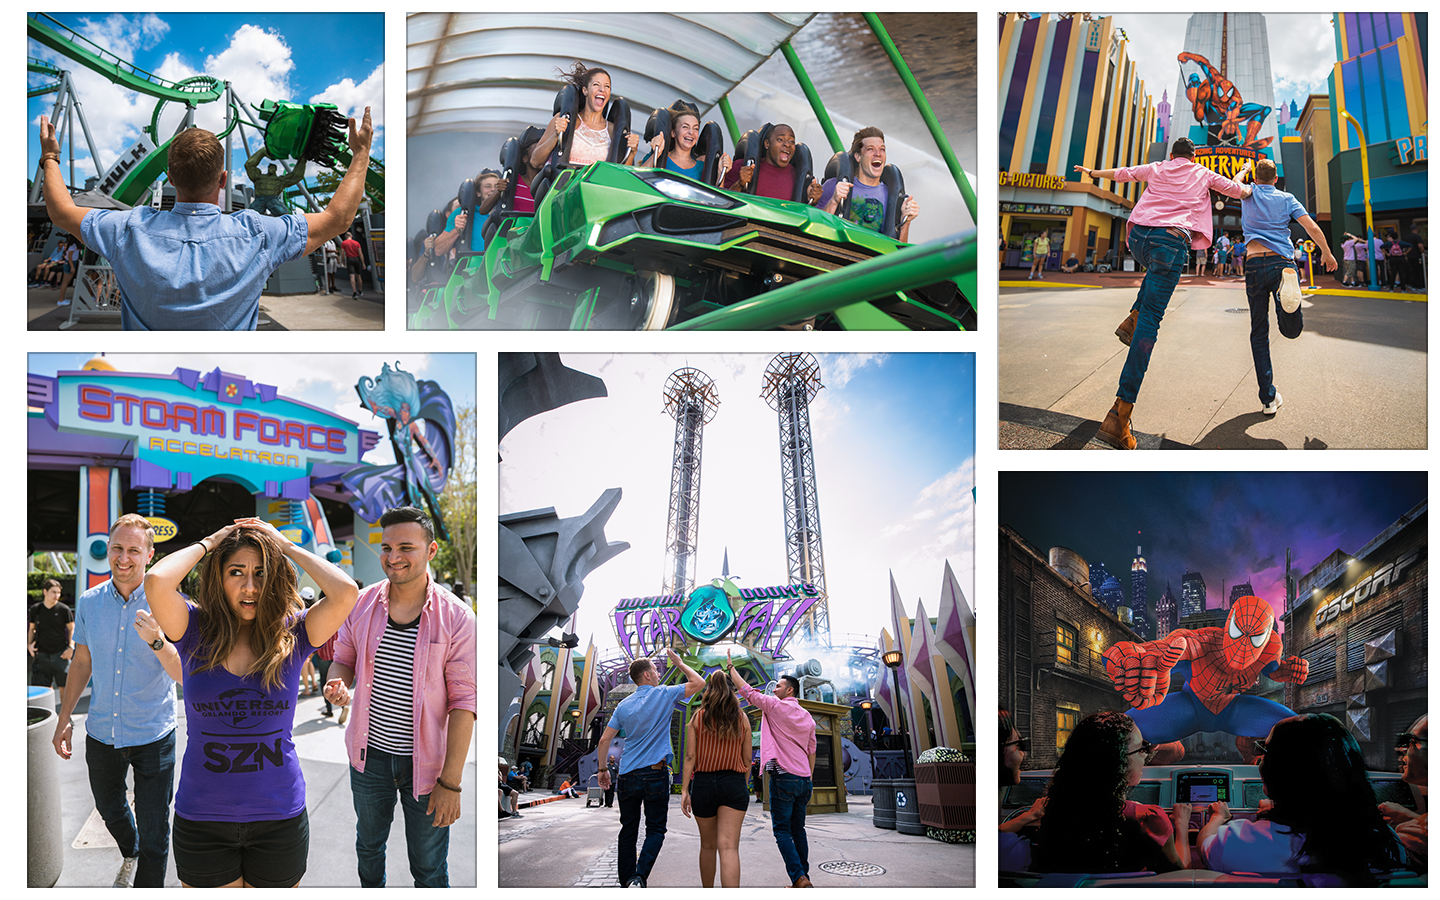 Experience the incredible Hulk coaster, go web slinging on the amazing adventures of Spider-Man, take on Doctor Doom's fearfall and more.